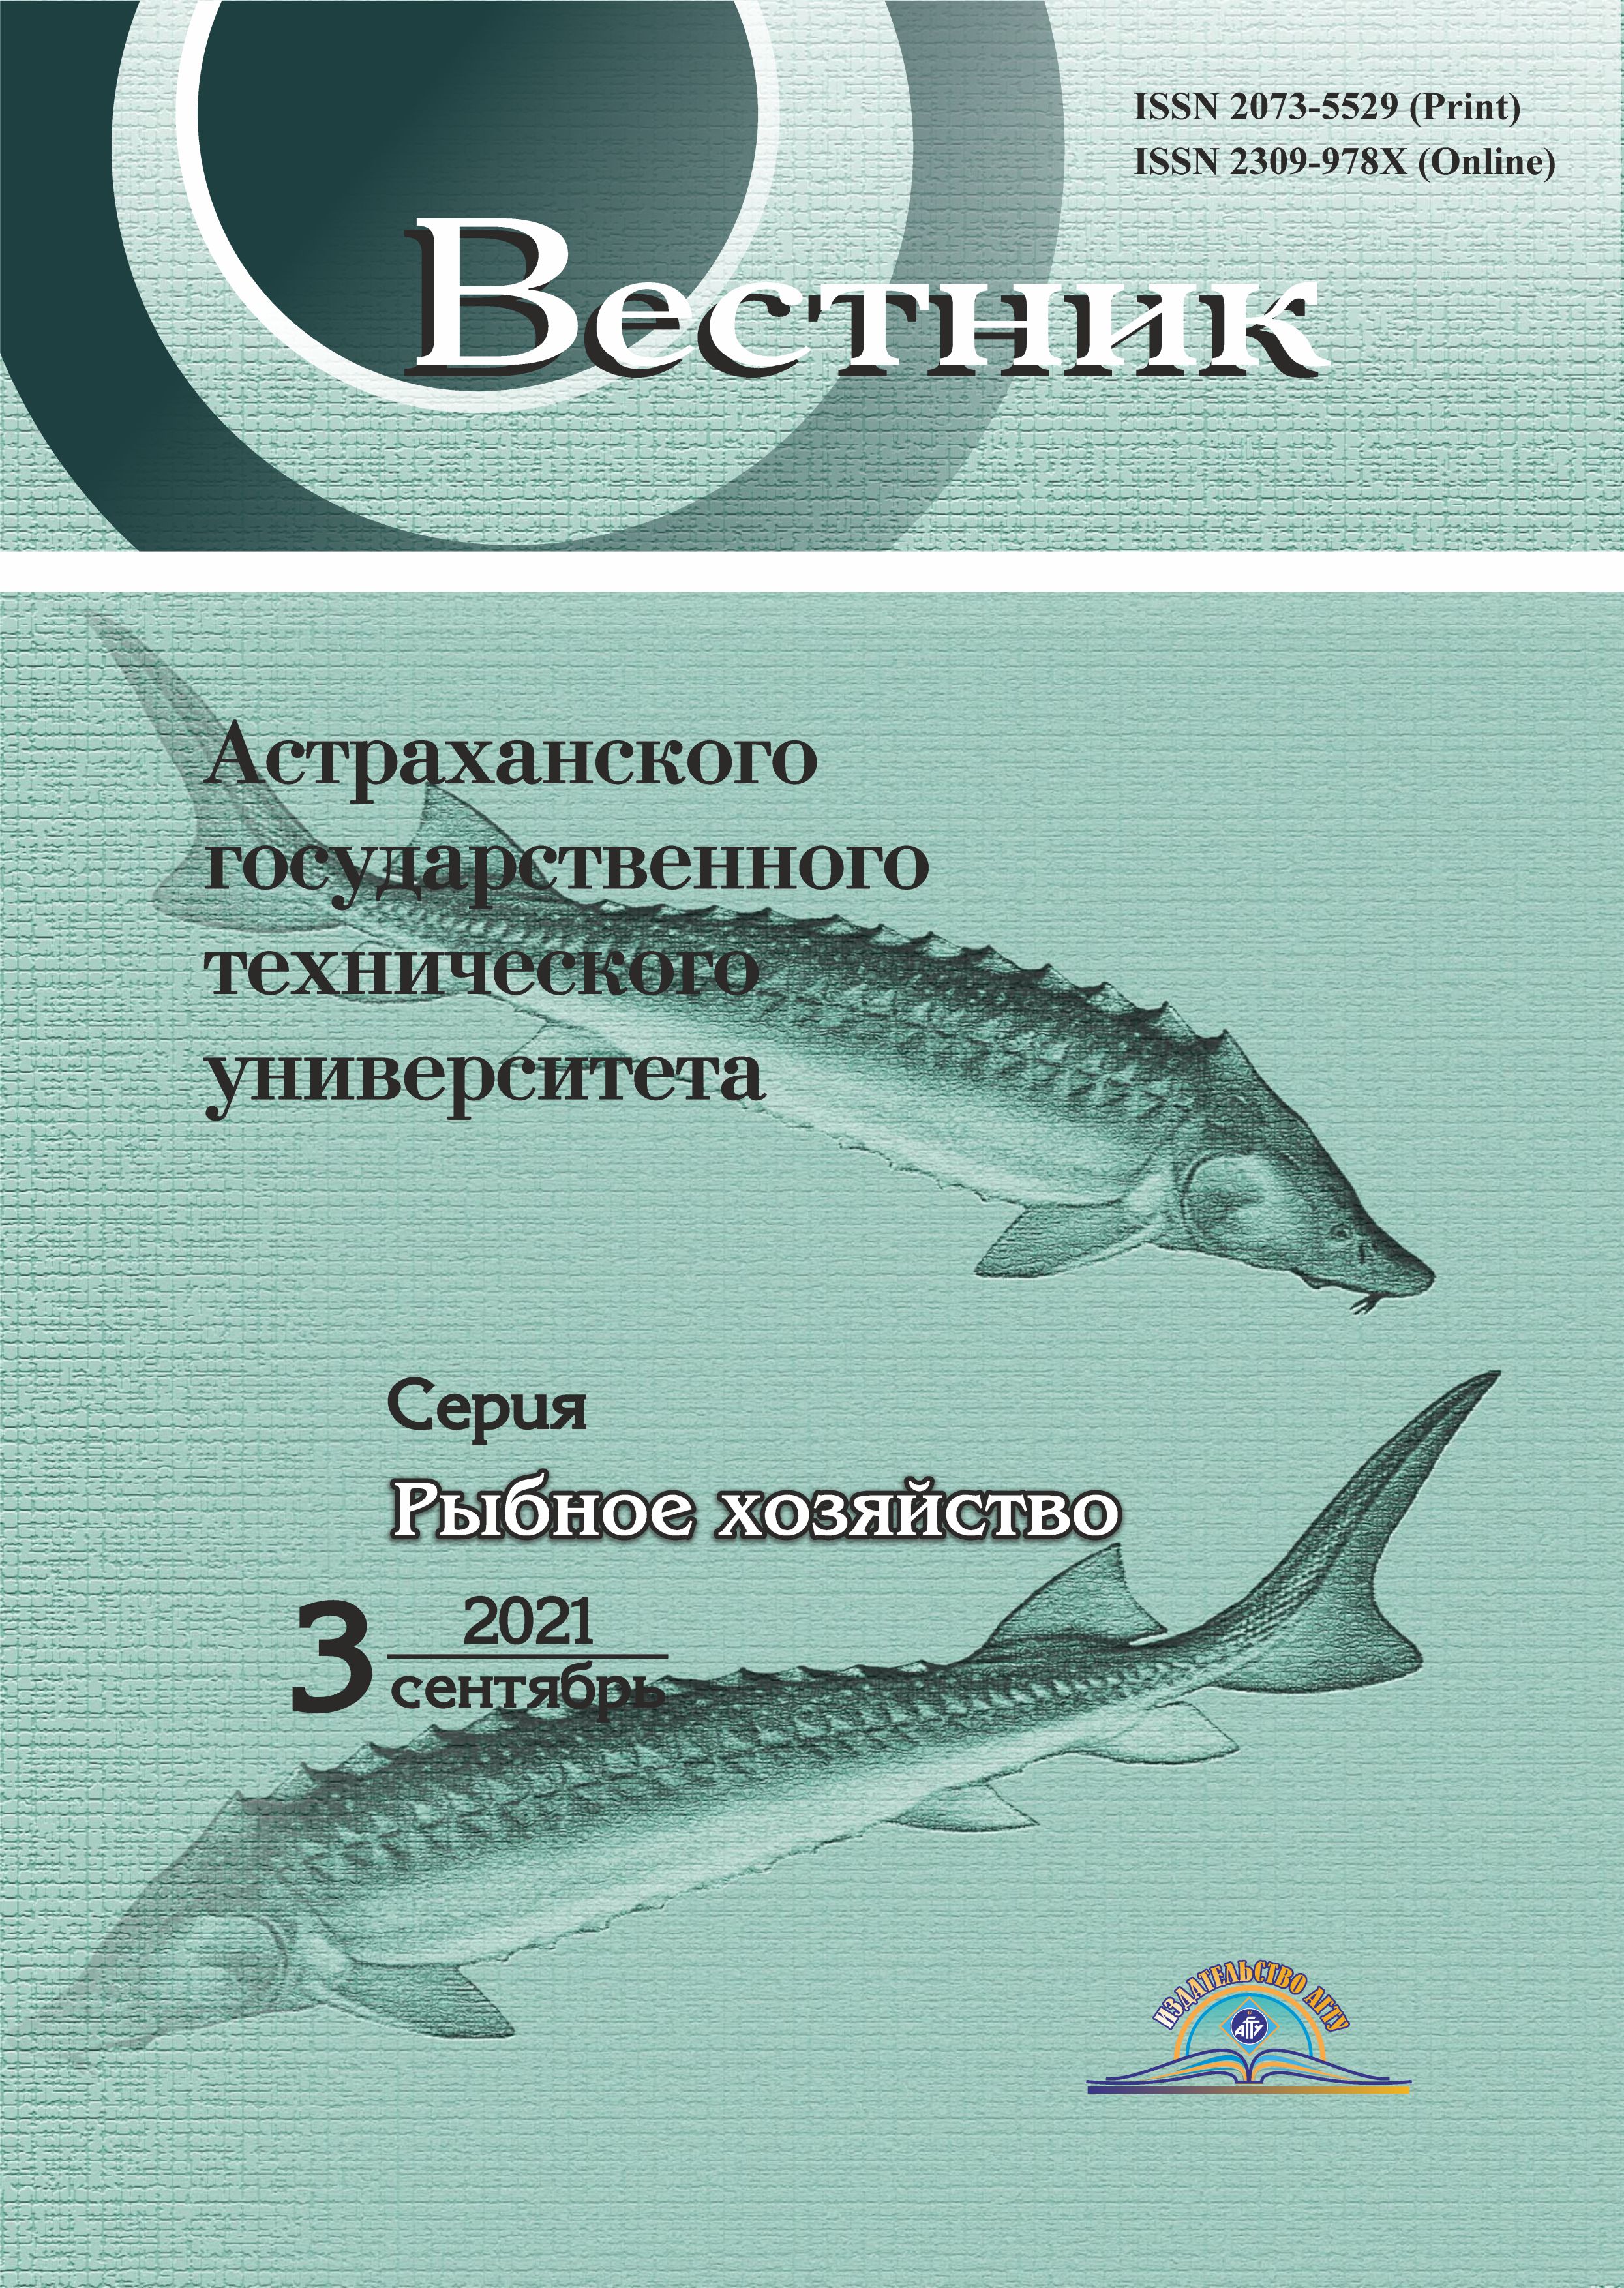                         CHARACTERISTICS OF PHYTOPLANKTON DEVELOPMENT   IN MIDDLE CASPIAN IN SUMMER PERIOD
            